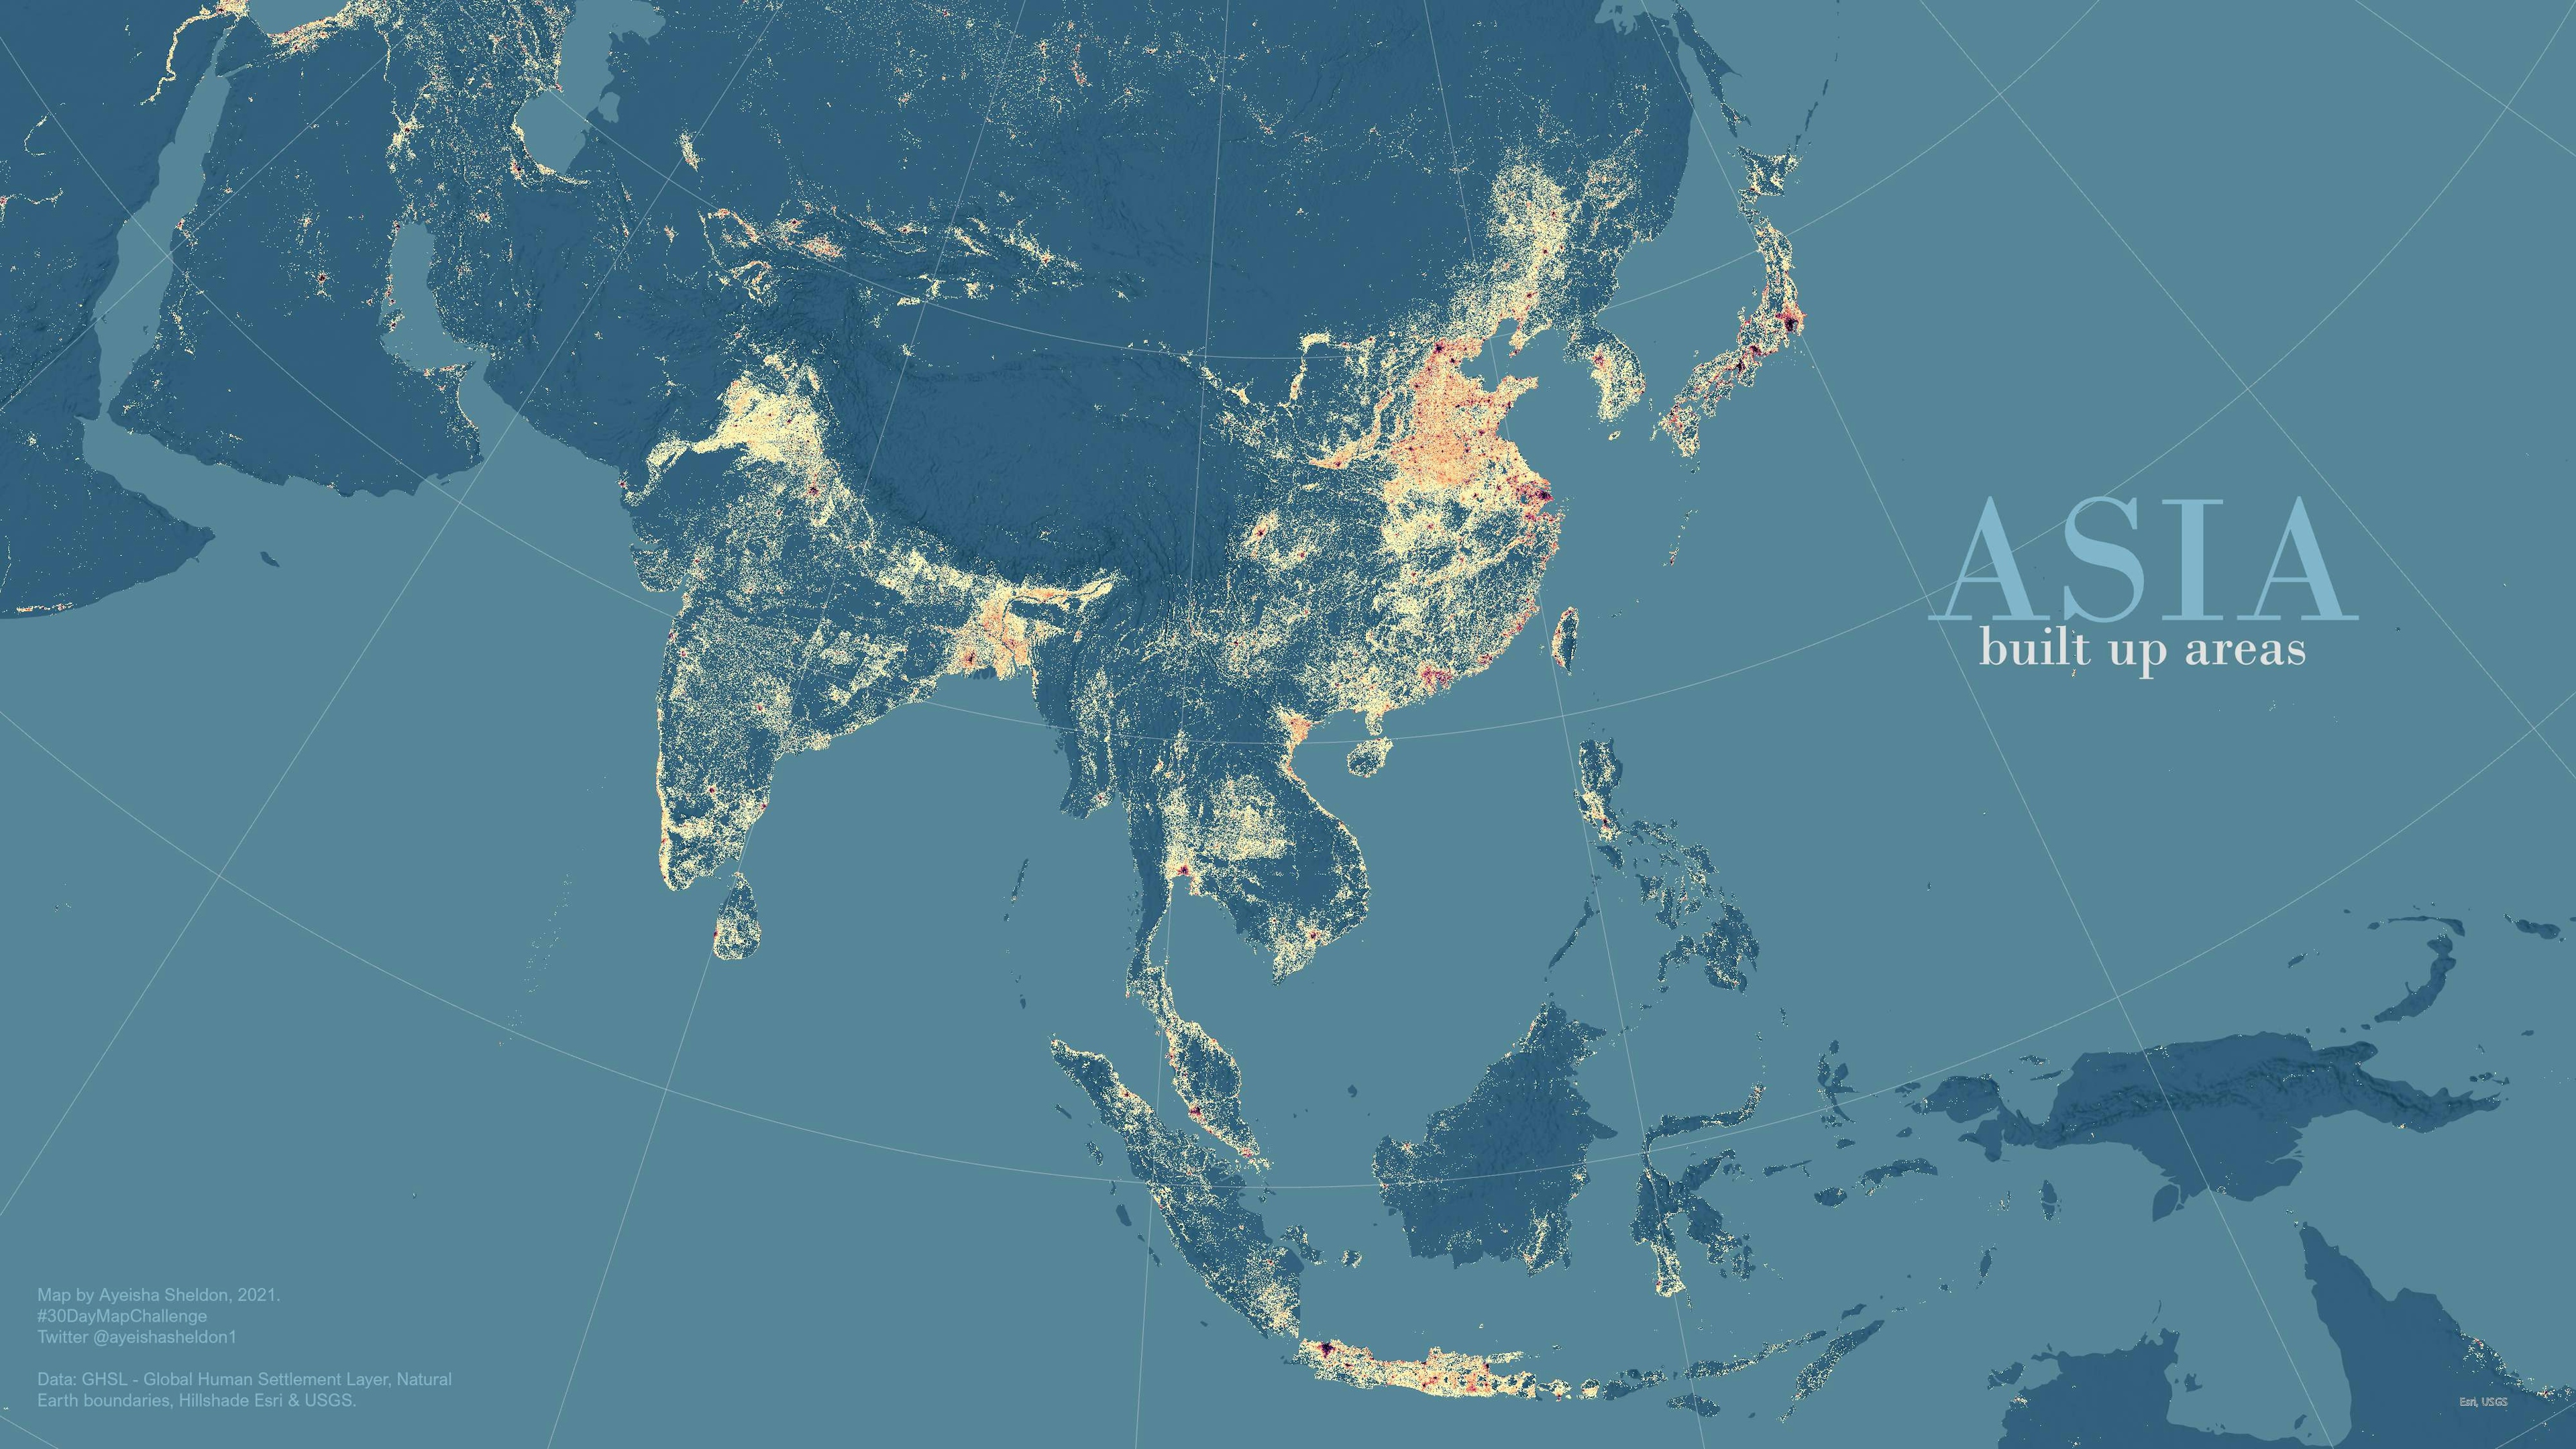 Built up areas of Asia